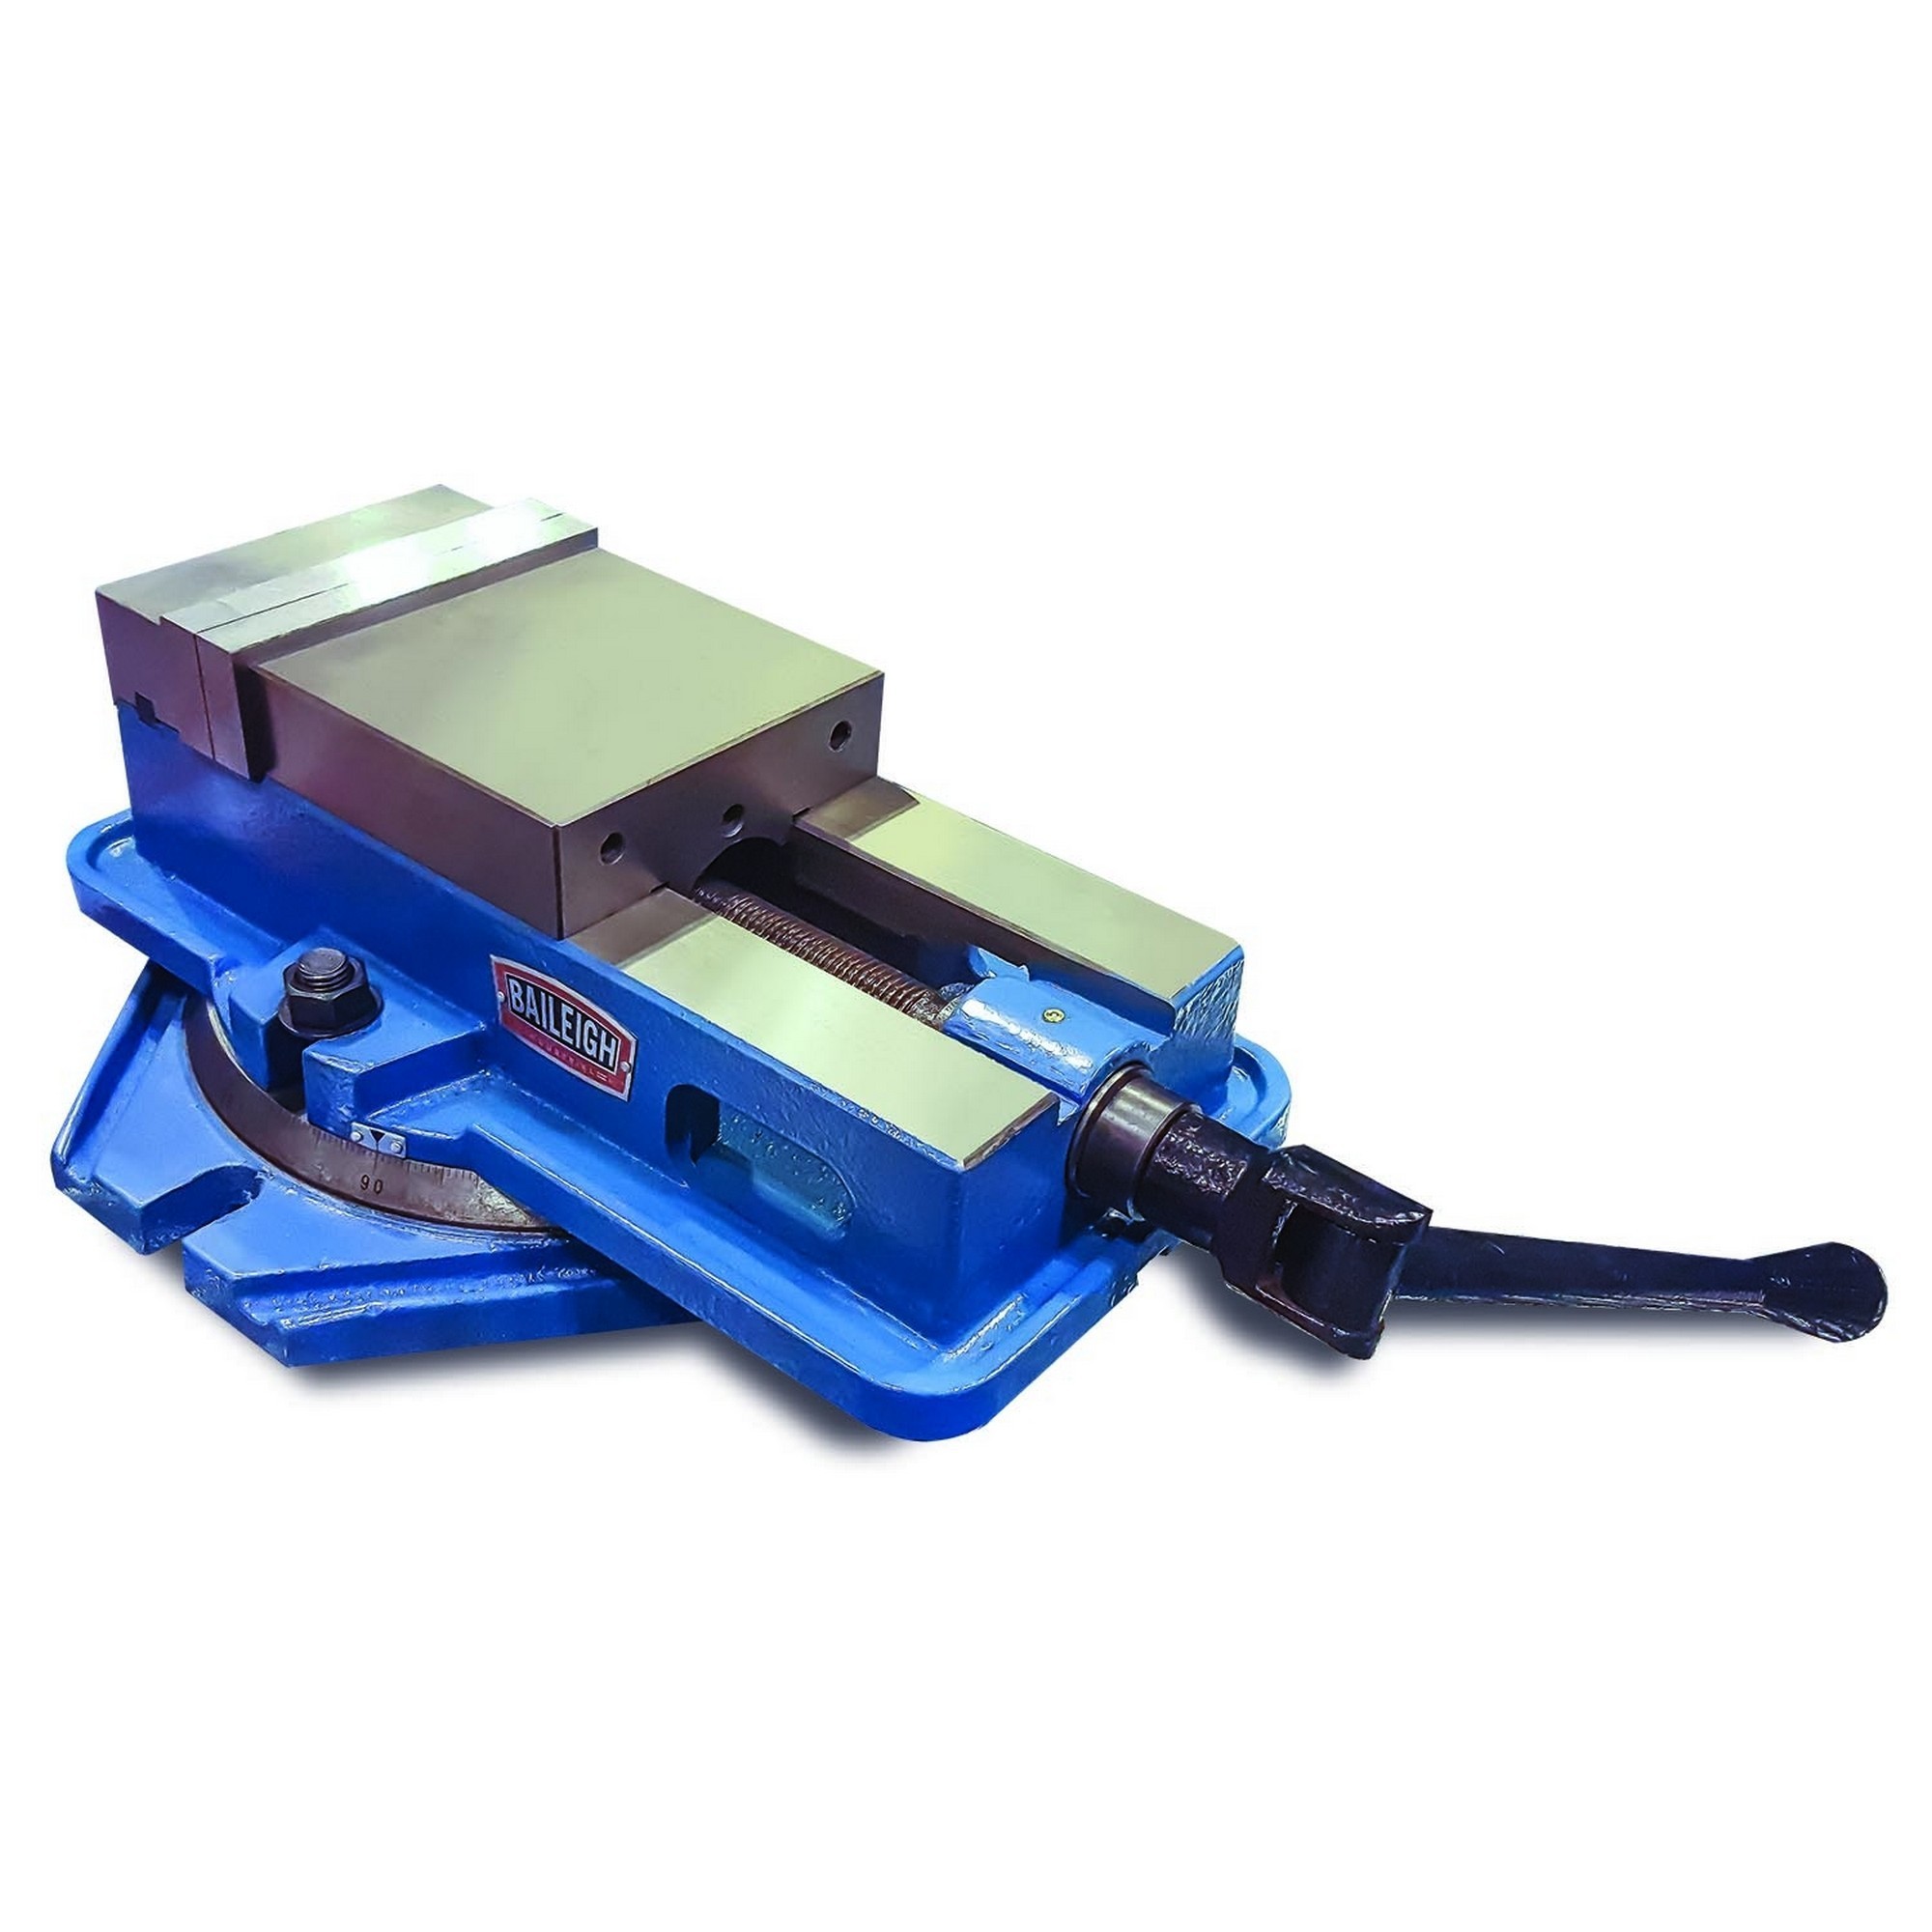 Baileigh, Machine Vise, Jaw Width 6 in, Jaw Capacity 6 in, Model BV-6M